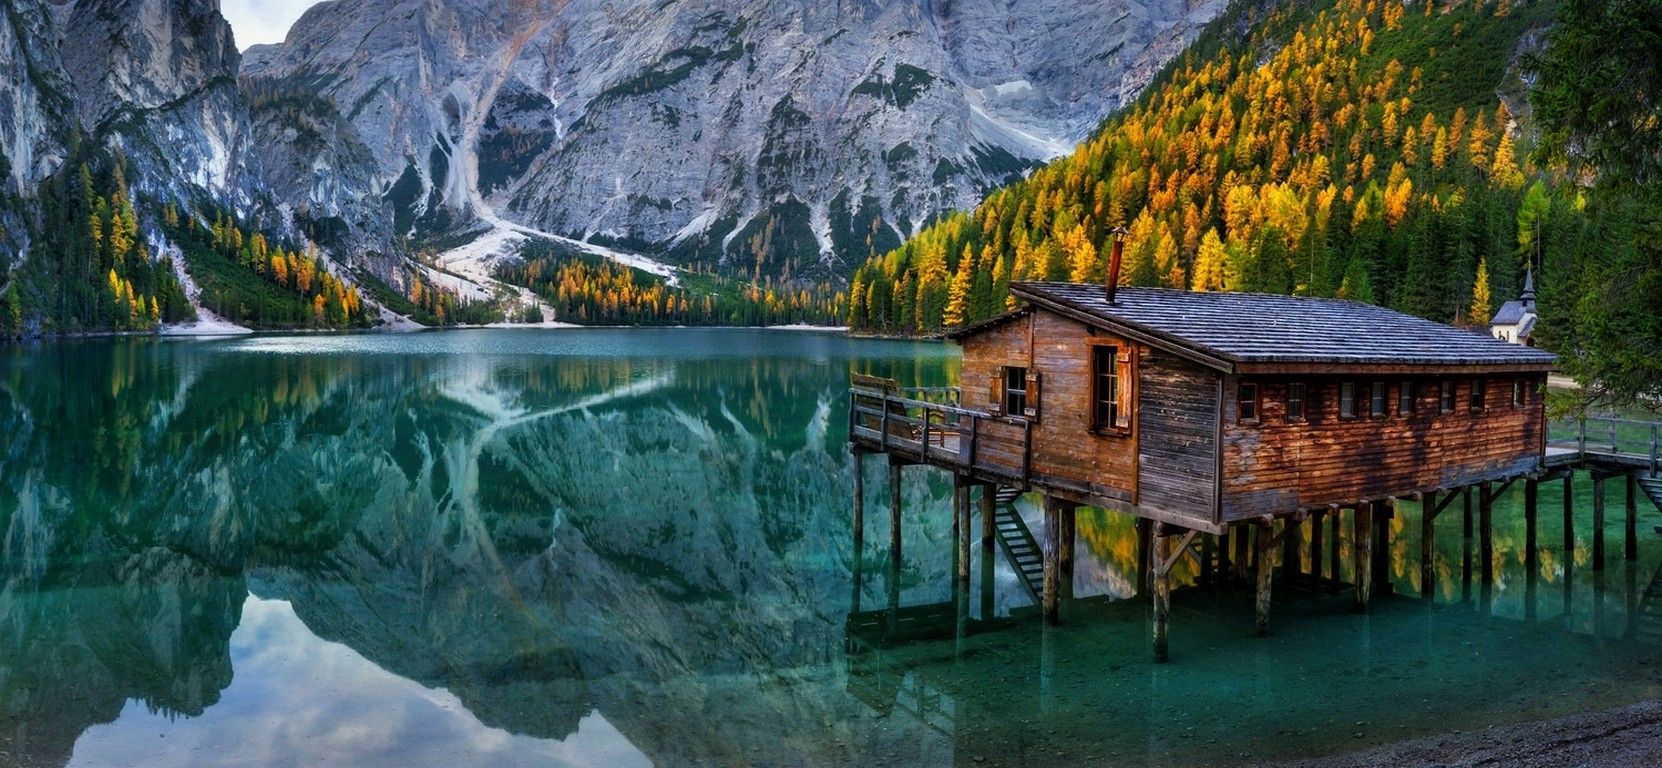 #turquoise, #landscape, #chapel, #lake, #forest, #water